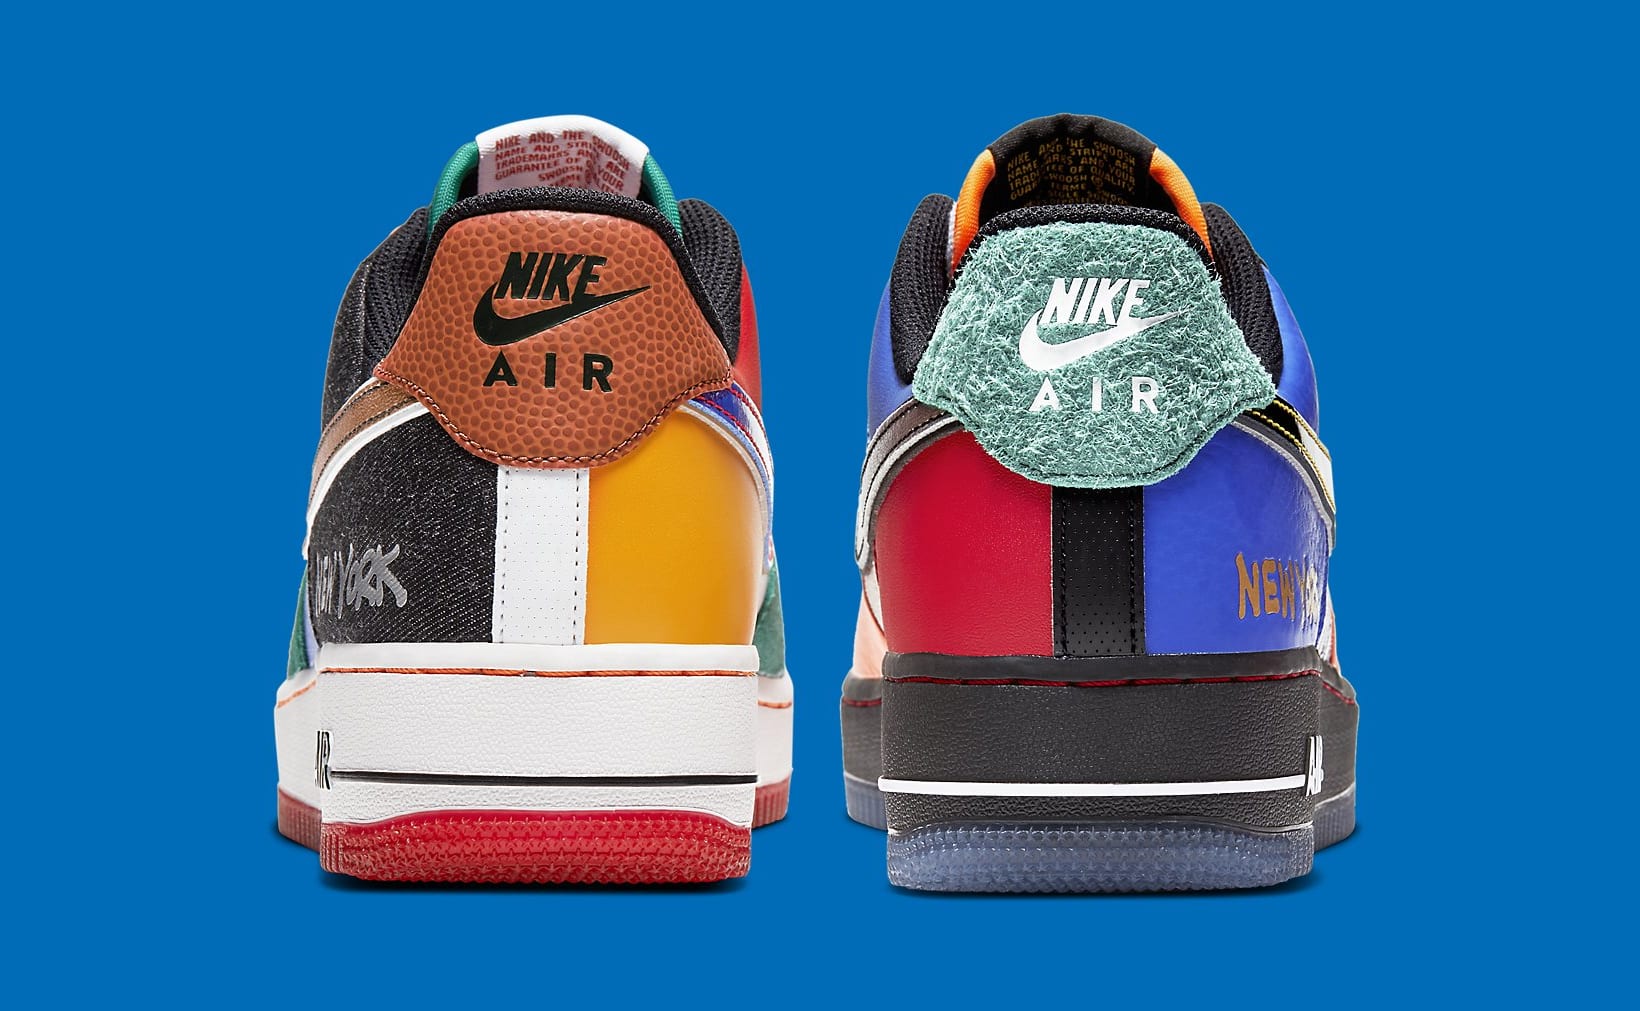 Buy Air Force 1 Low '07 'What The NYC' - CT3610 100 - Multi-Color